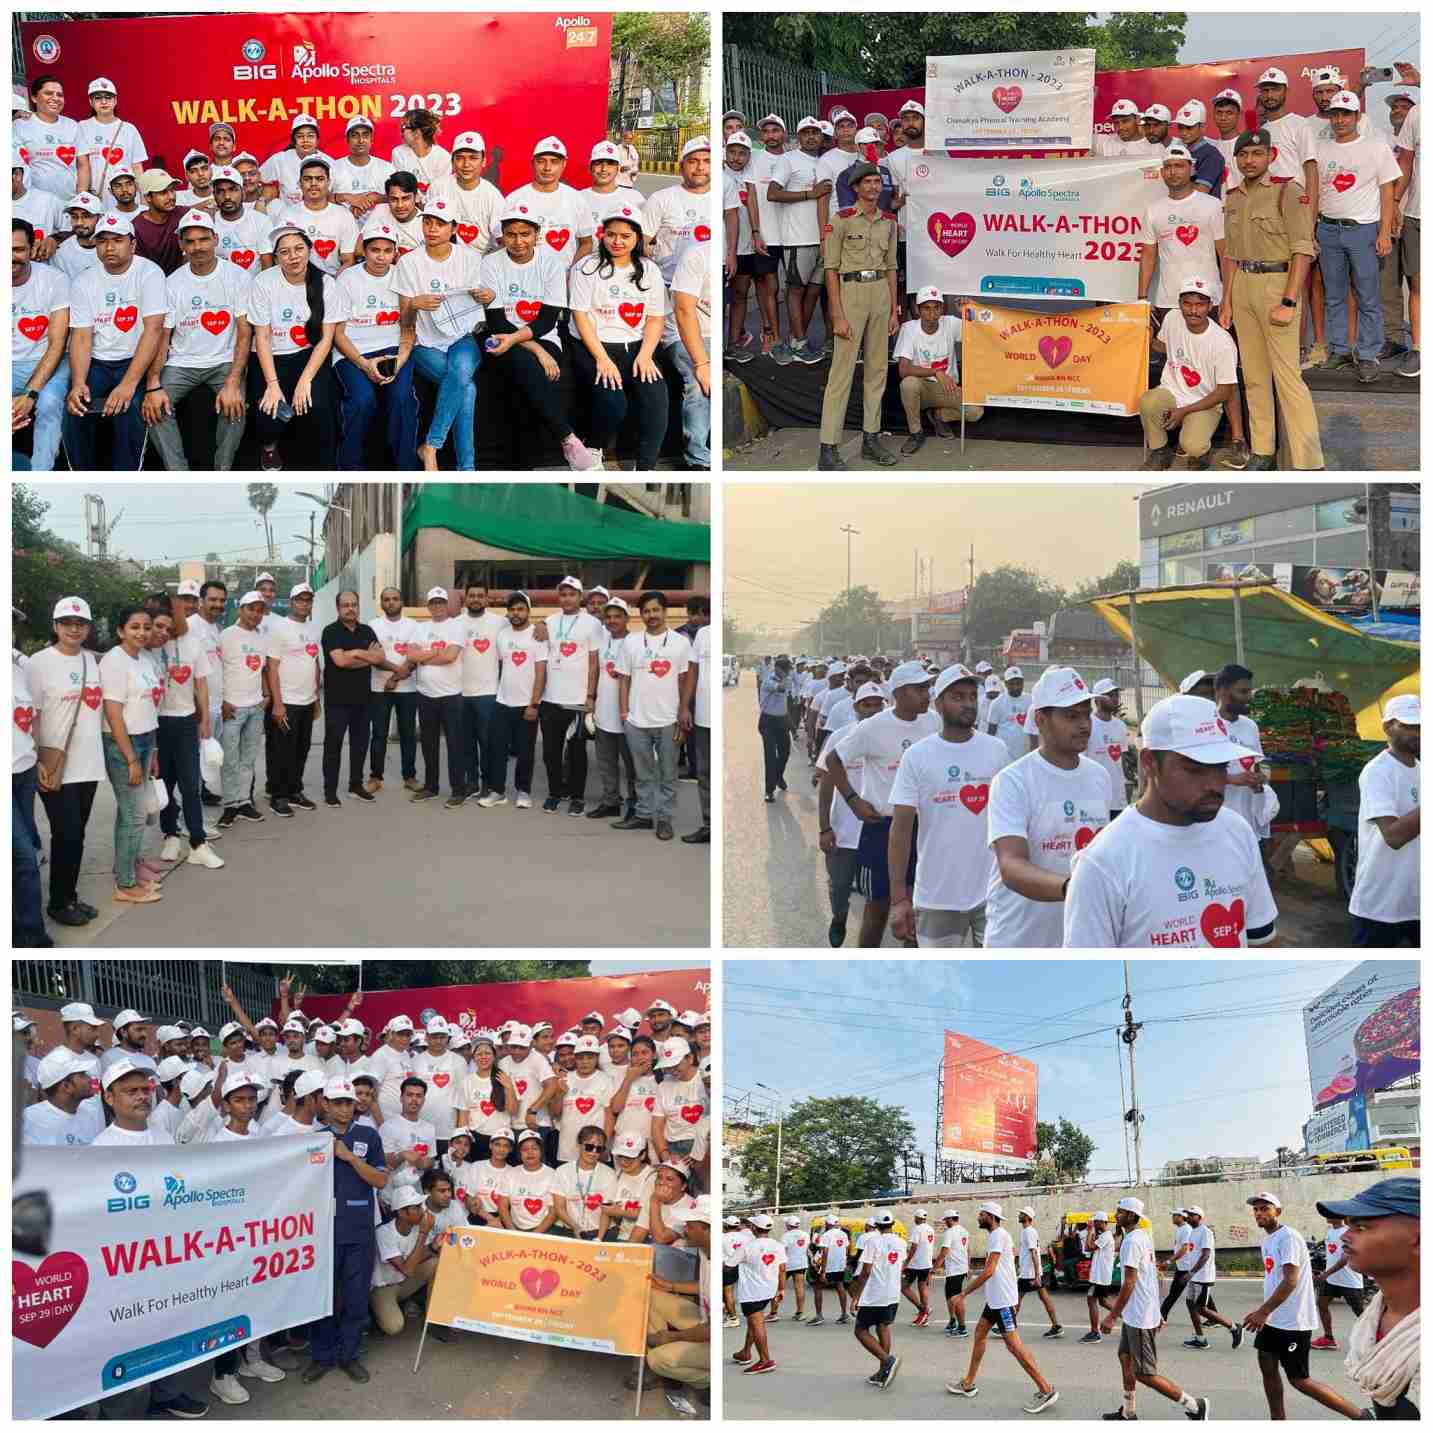 On this special occasion of World Heart Day 2023, 𝗕𝗜𝗚 𝗔𝗽𝗼𝗹𝗹𝗼 𝗦𝗽𝗲𝗰𝘁𝗿𝗮 𝗛𝗼𝘀𝗽𝗶𝘁𝗮𝗹 took the lead in spreading awareness for a healthier heart. 